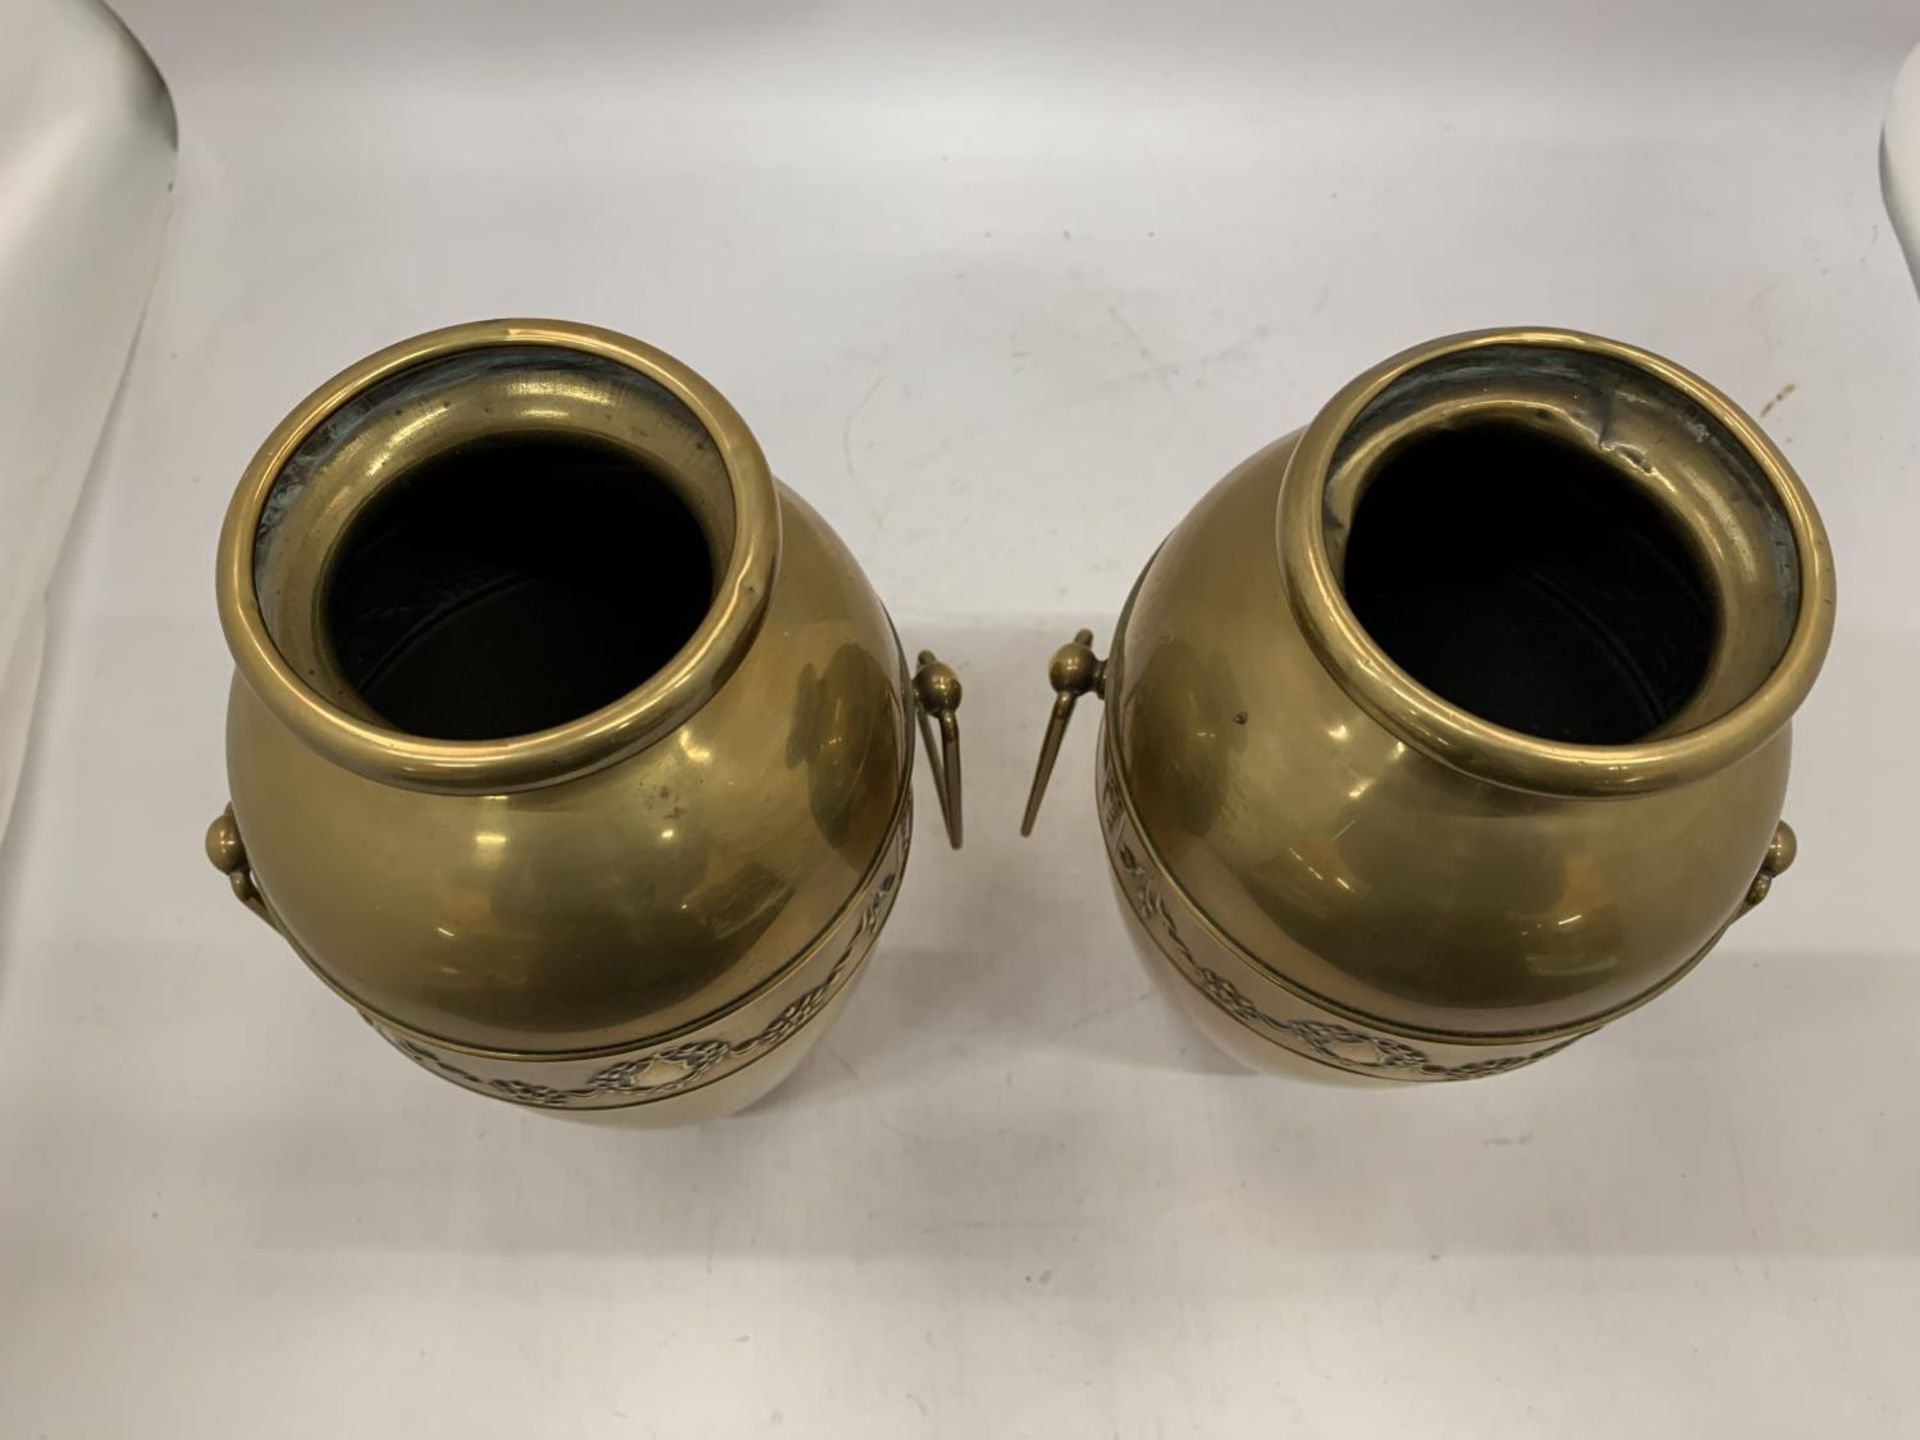 A PAIR OF ART NOUVEAU DESIGN BELDRAY BRASS VASES WITH SIDE HANDLES AND EMBOSSED DECORATION HEIGHT - Image 3 of 6